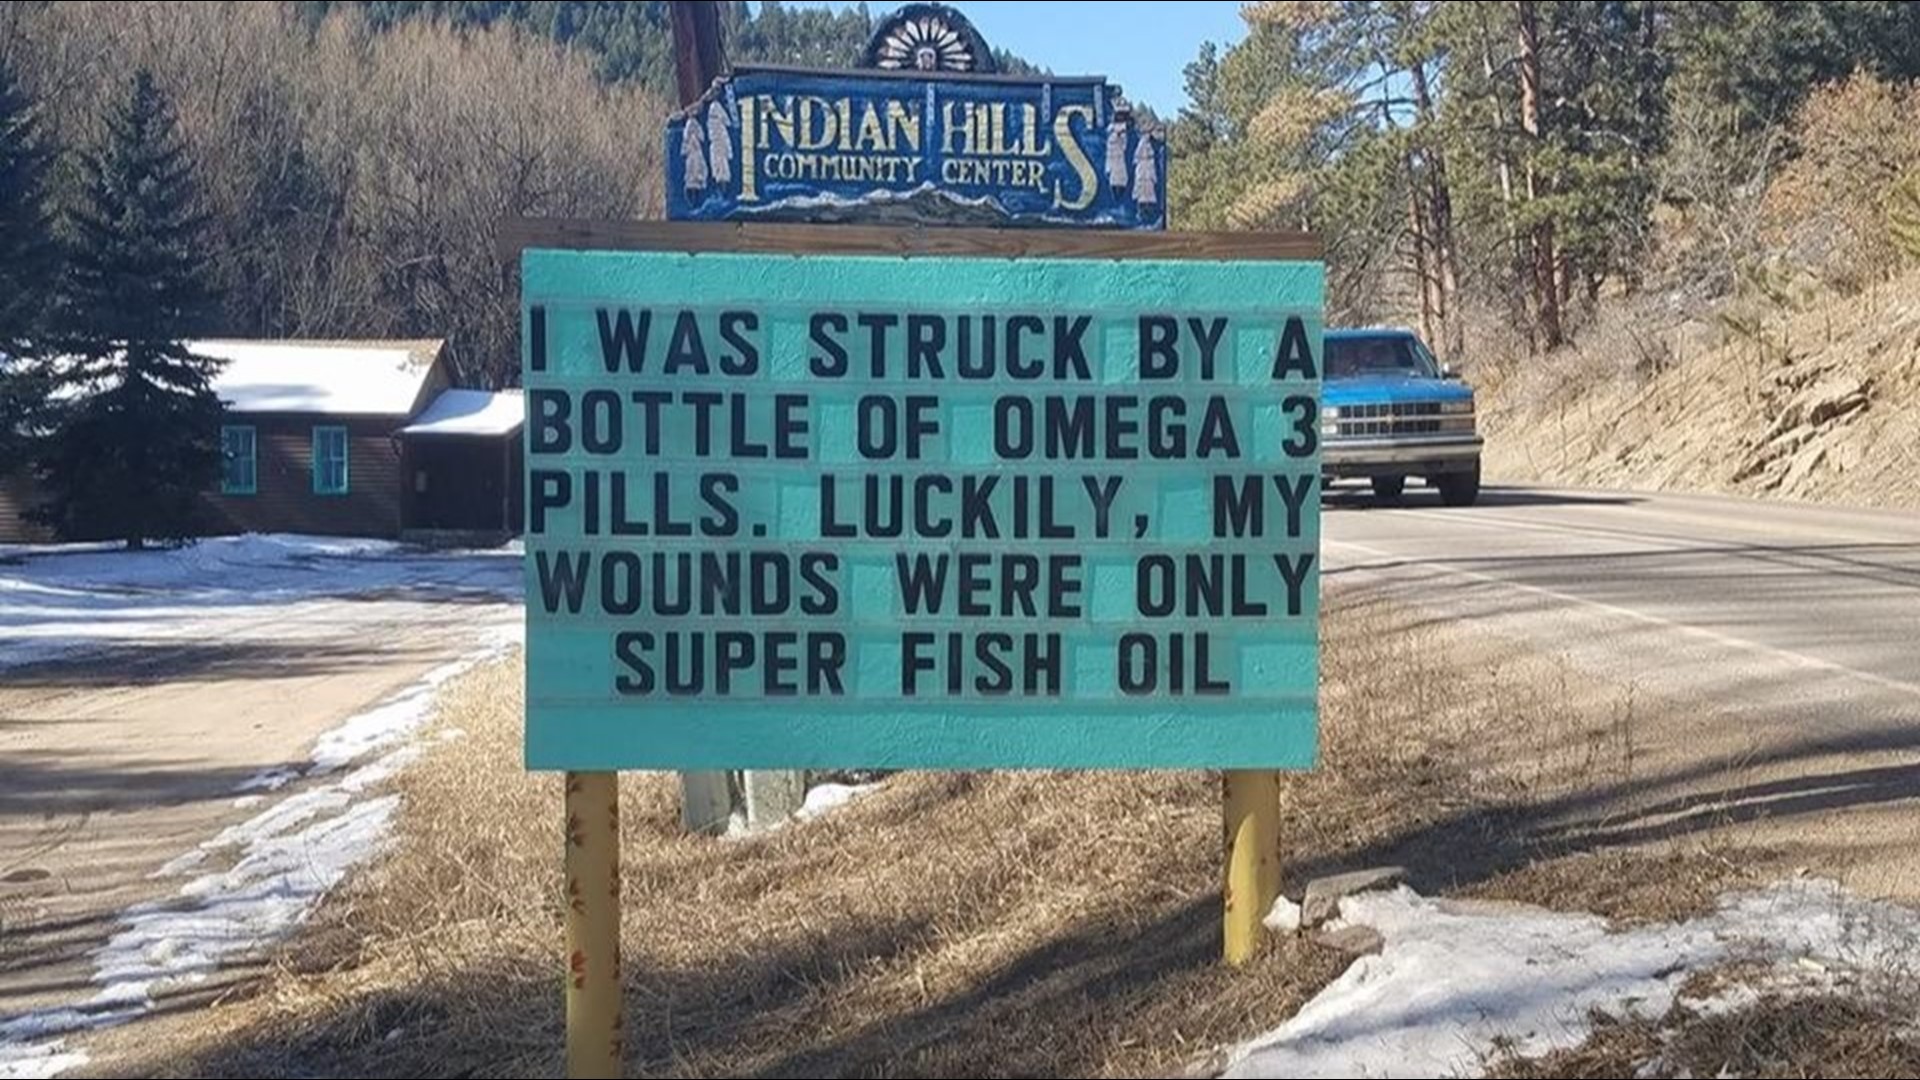 The story behind that punny sign in Indian Hills